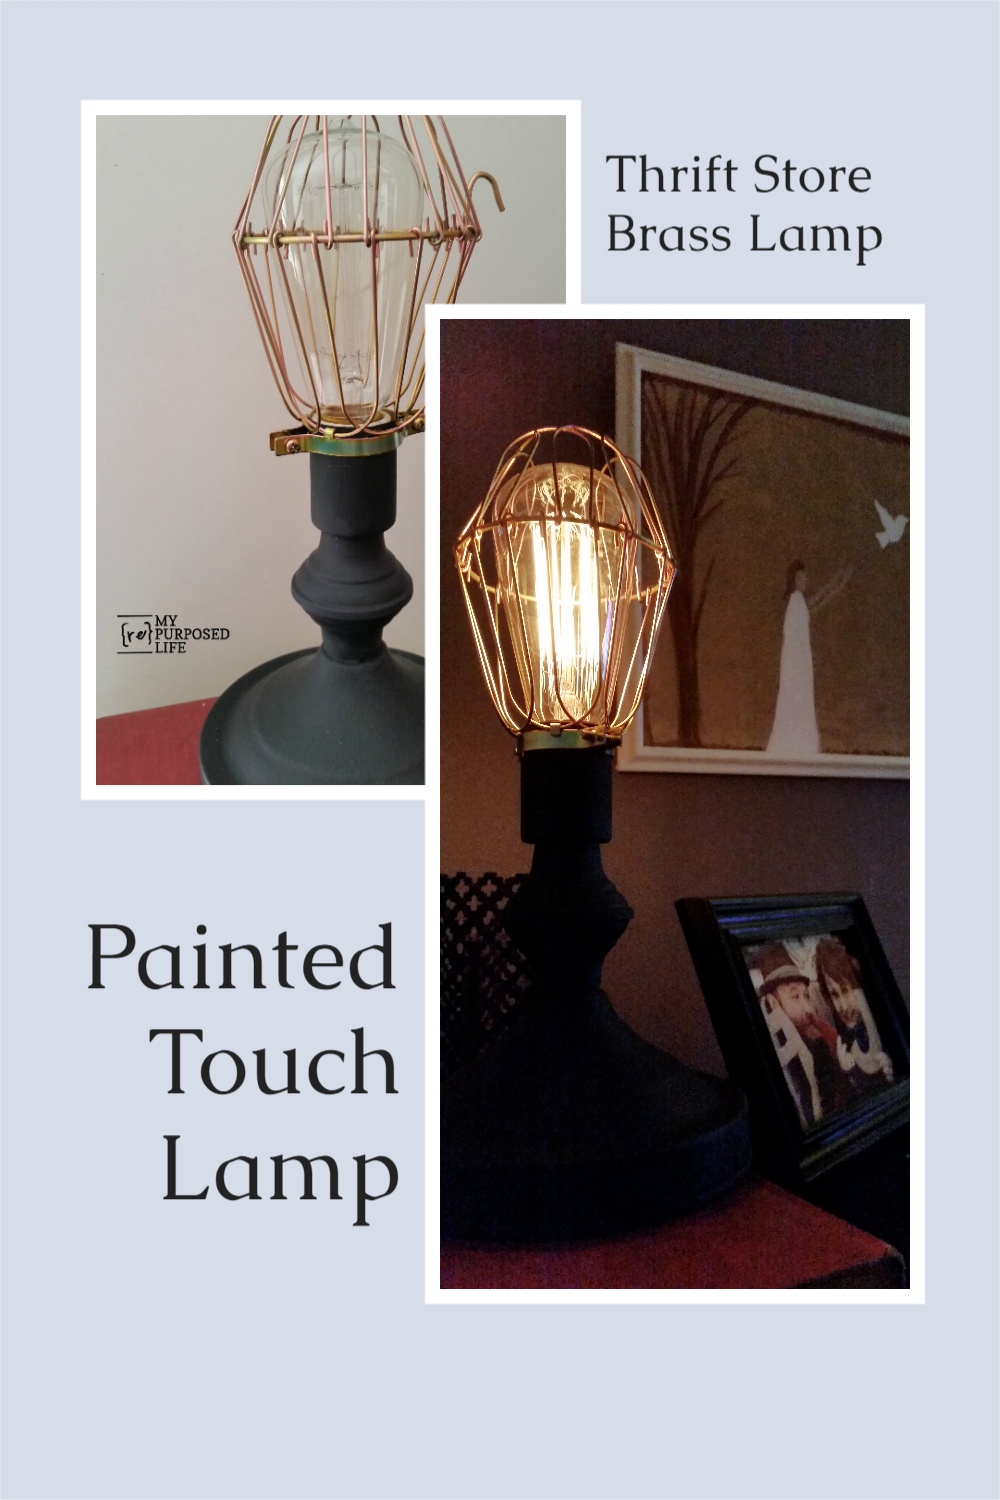 Have you ever thought of painting a touch lamp? This one was transformed into an Edison Bulb Table Lamp. Painted touch lamp works! #myrepurposedlife #edisonbulb #touchlamp #easy #diy #makeover #upcycle #thriftstorelamp via @repurposedlife